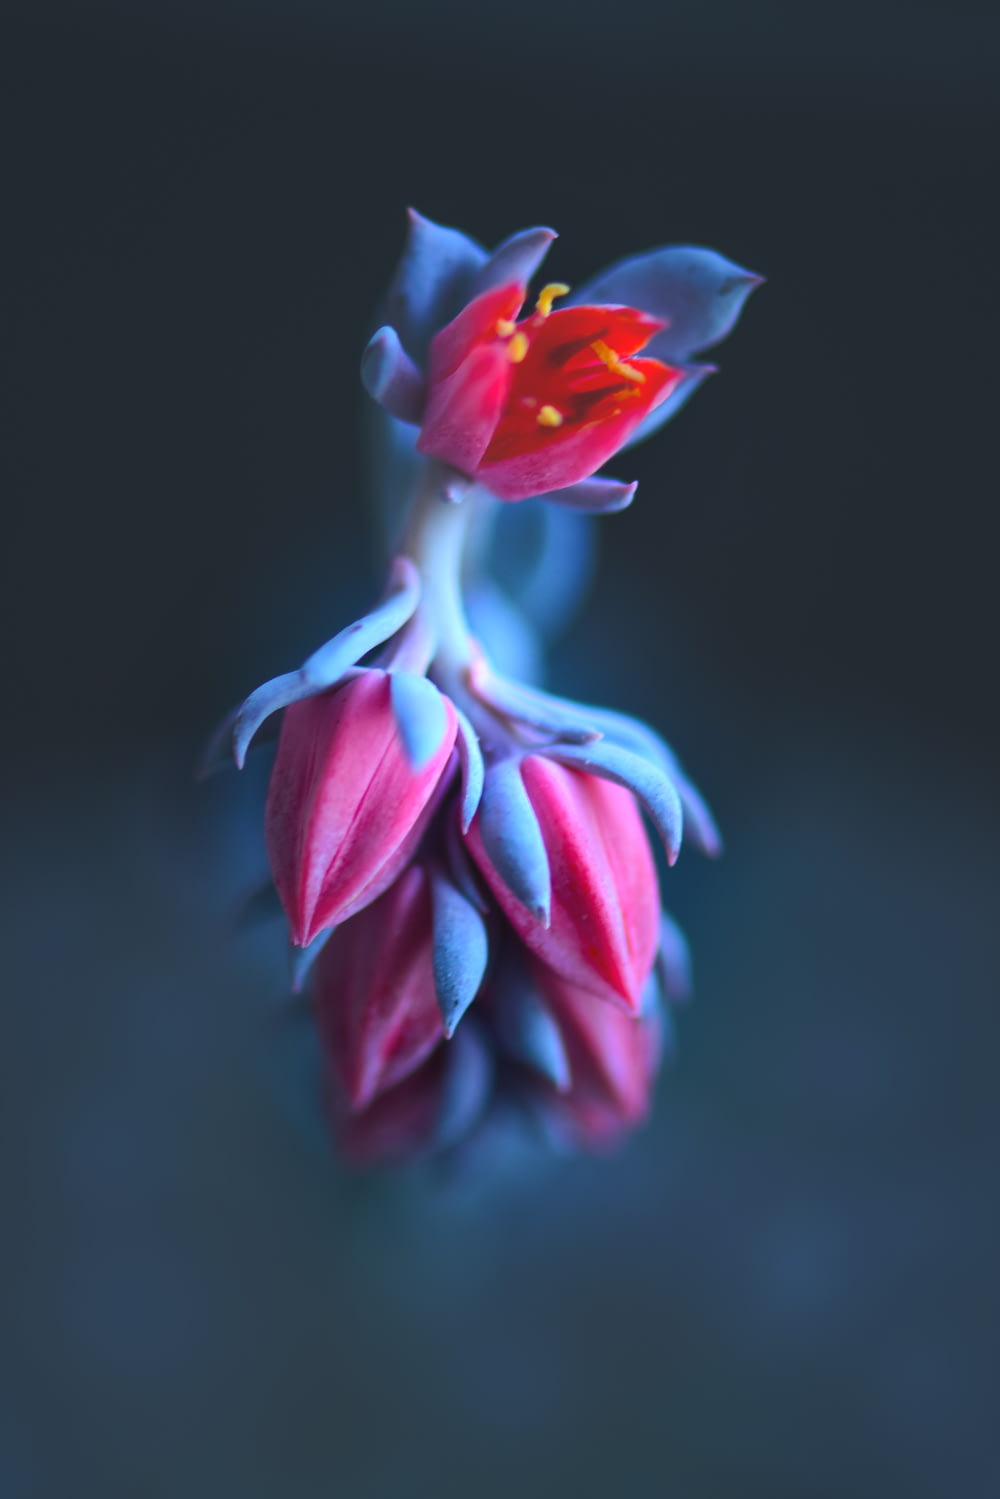 blue and red flower in close up photography